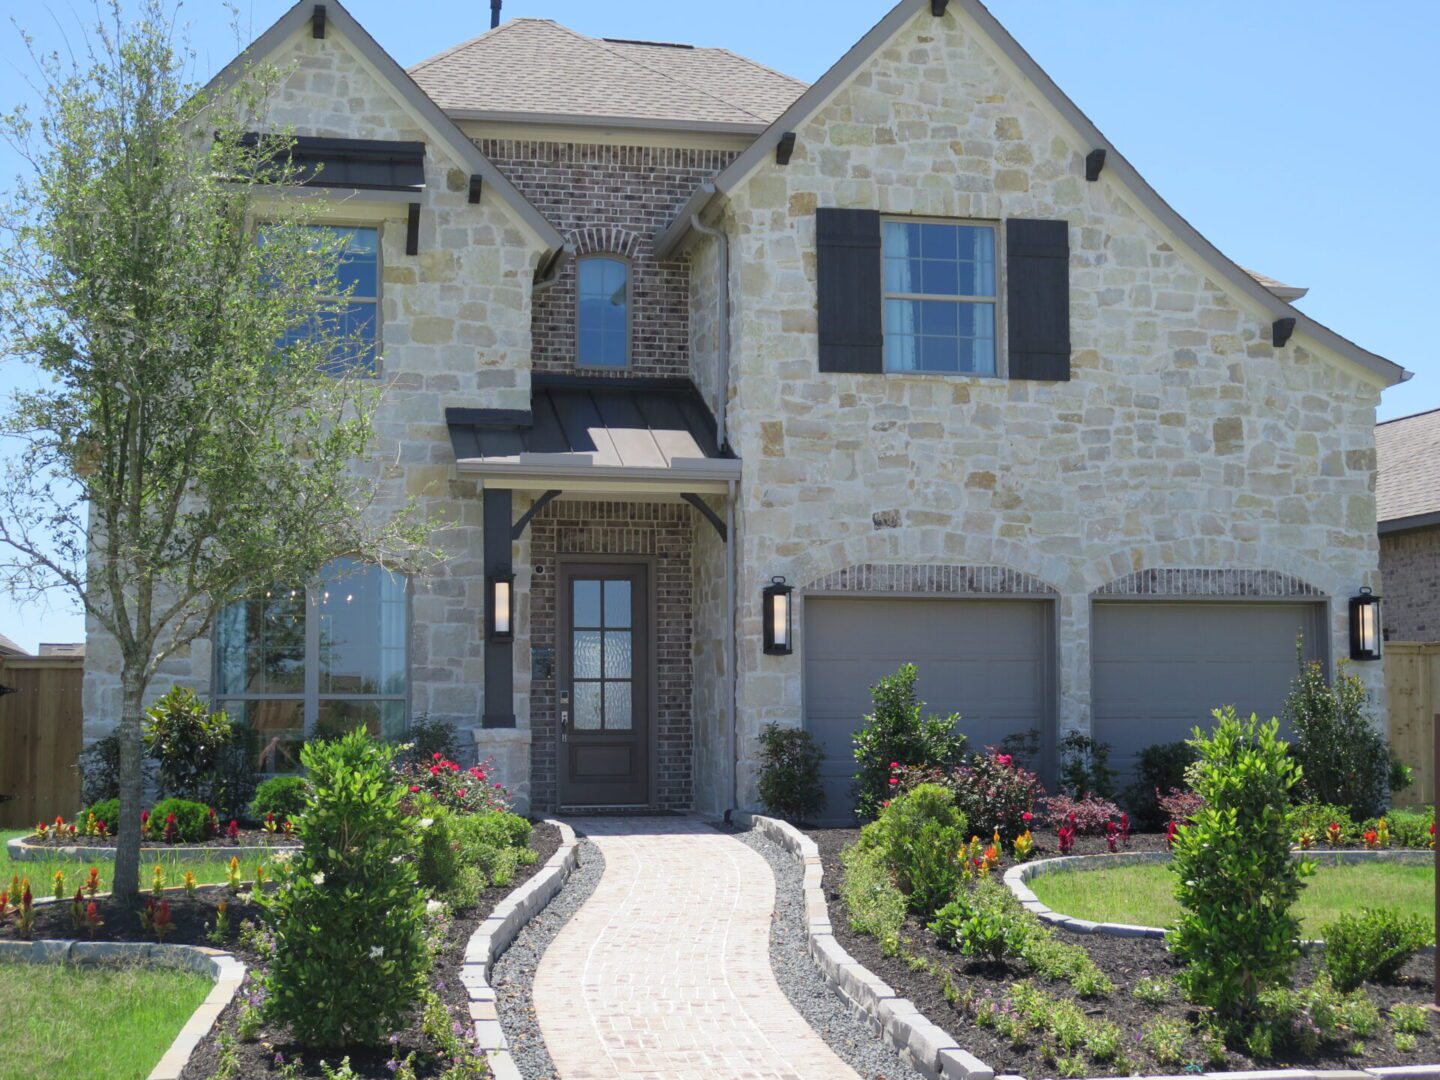 A suburban two-story house with a stone facade, dual garage doors, and a curved stone pathway lined with colorful flower beds, designed by Texas builders.